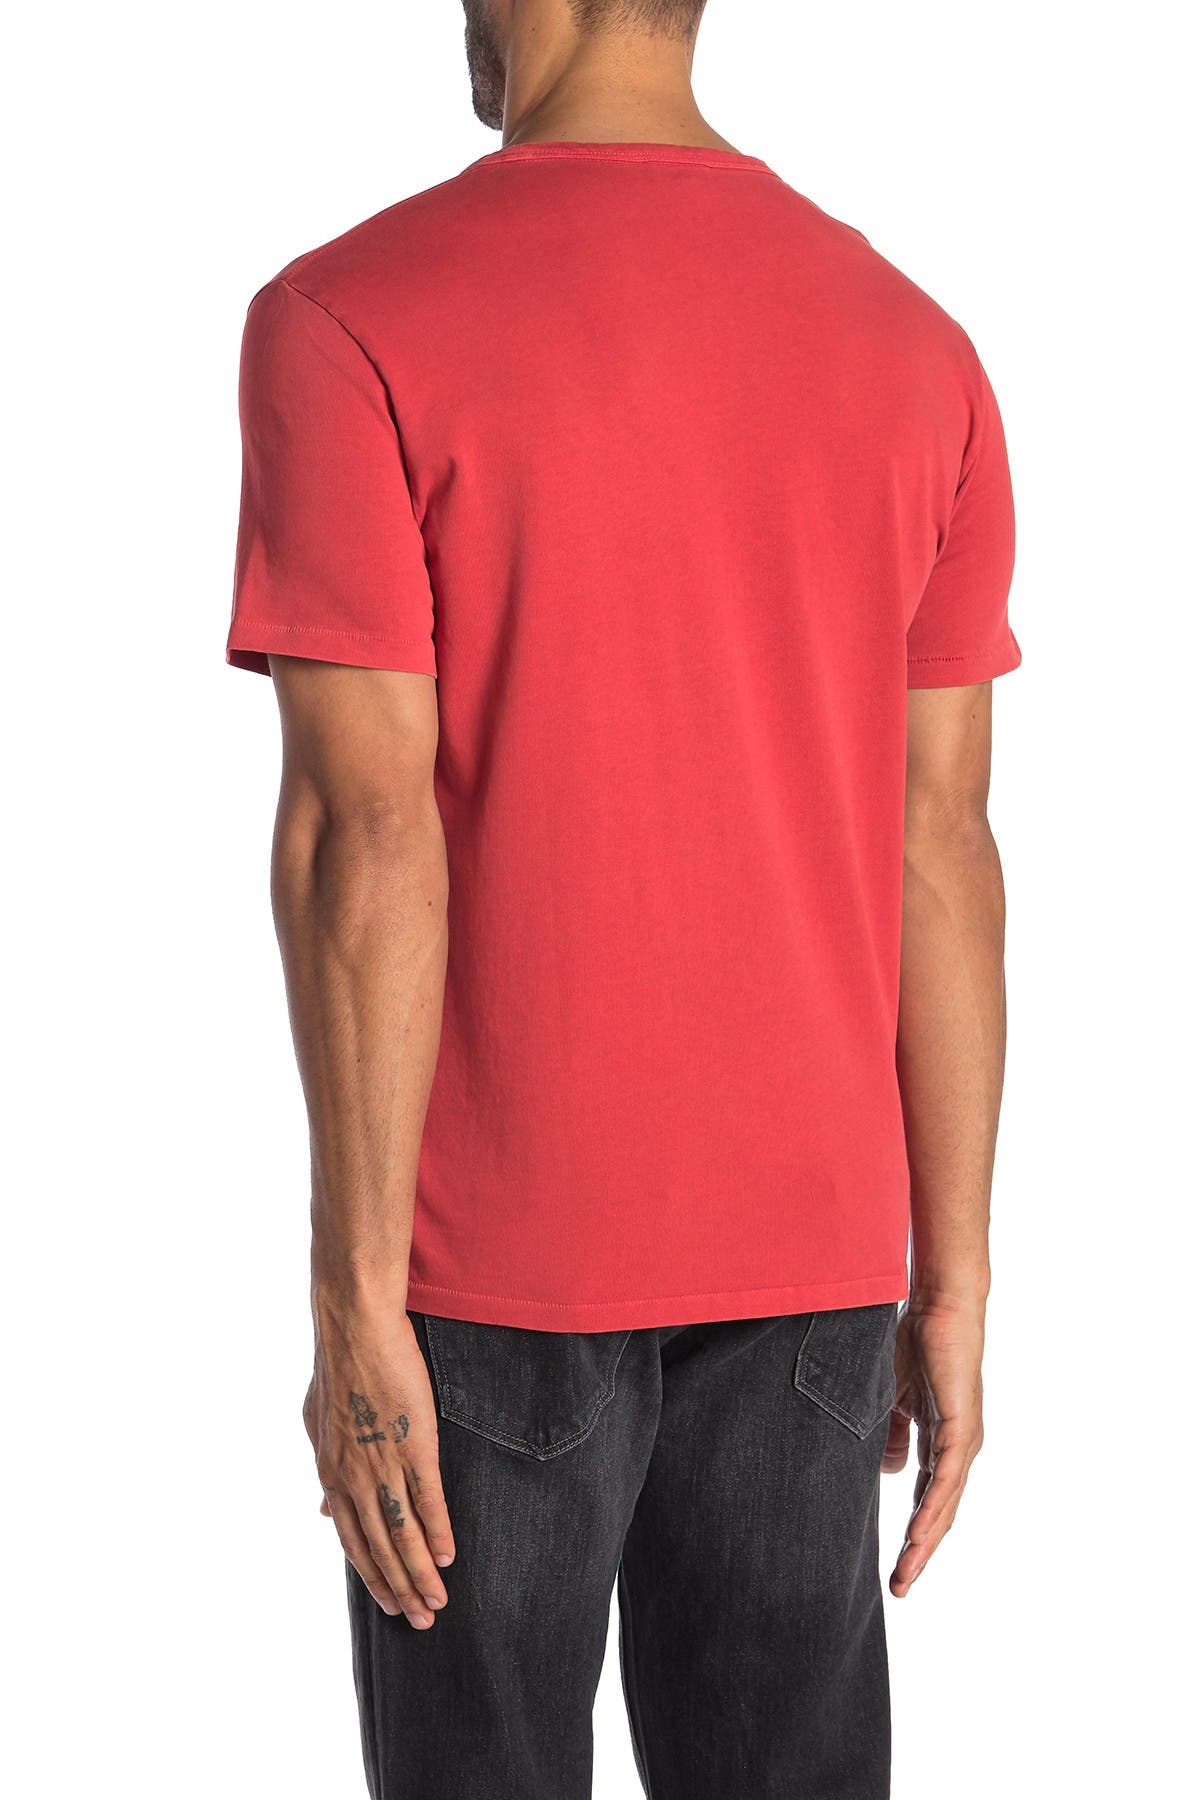 7 For All Mankind Commons Crew Neck T-shirt In Dark Red1